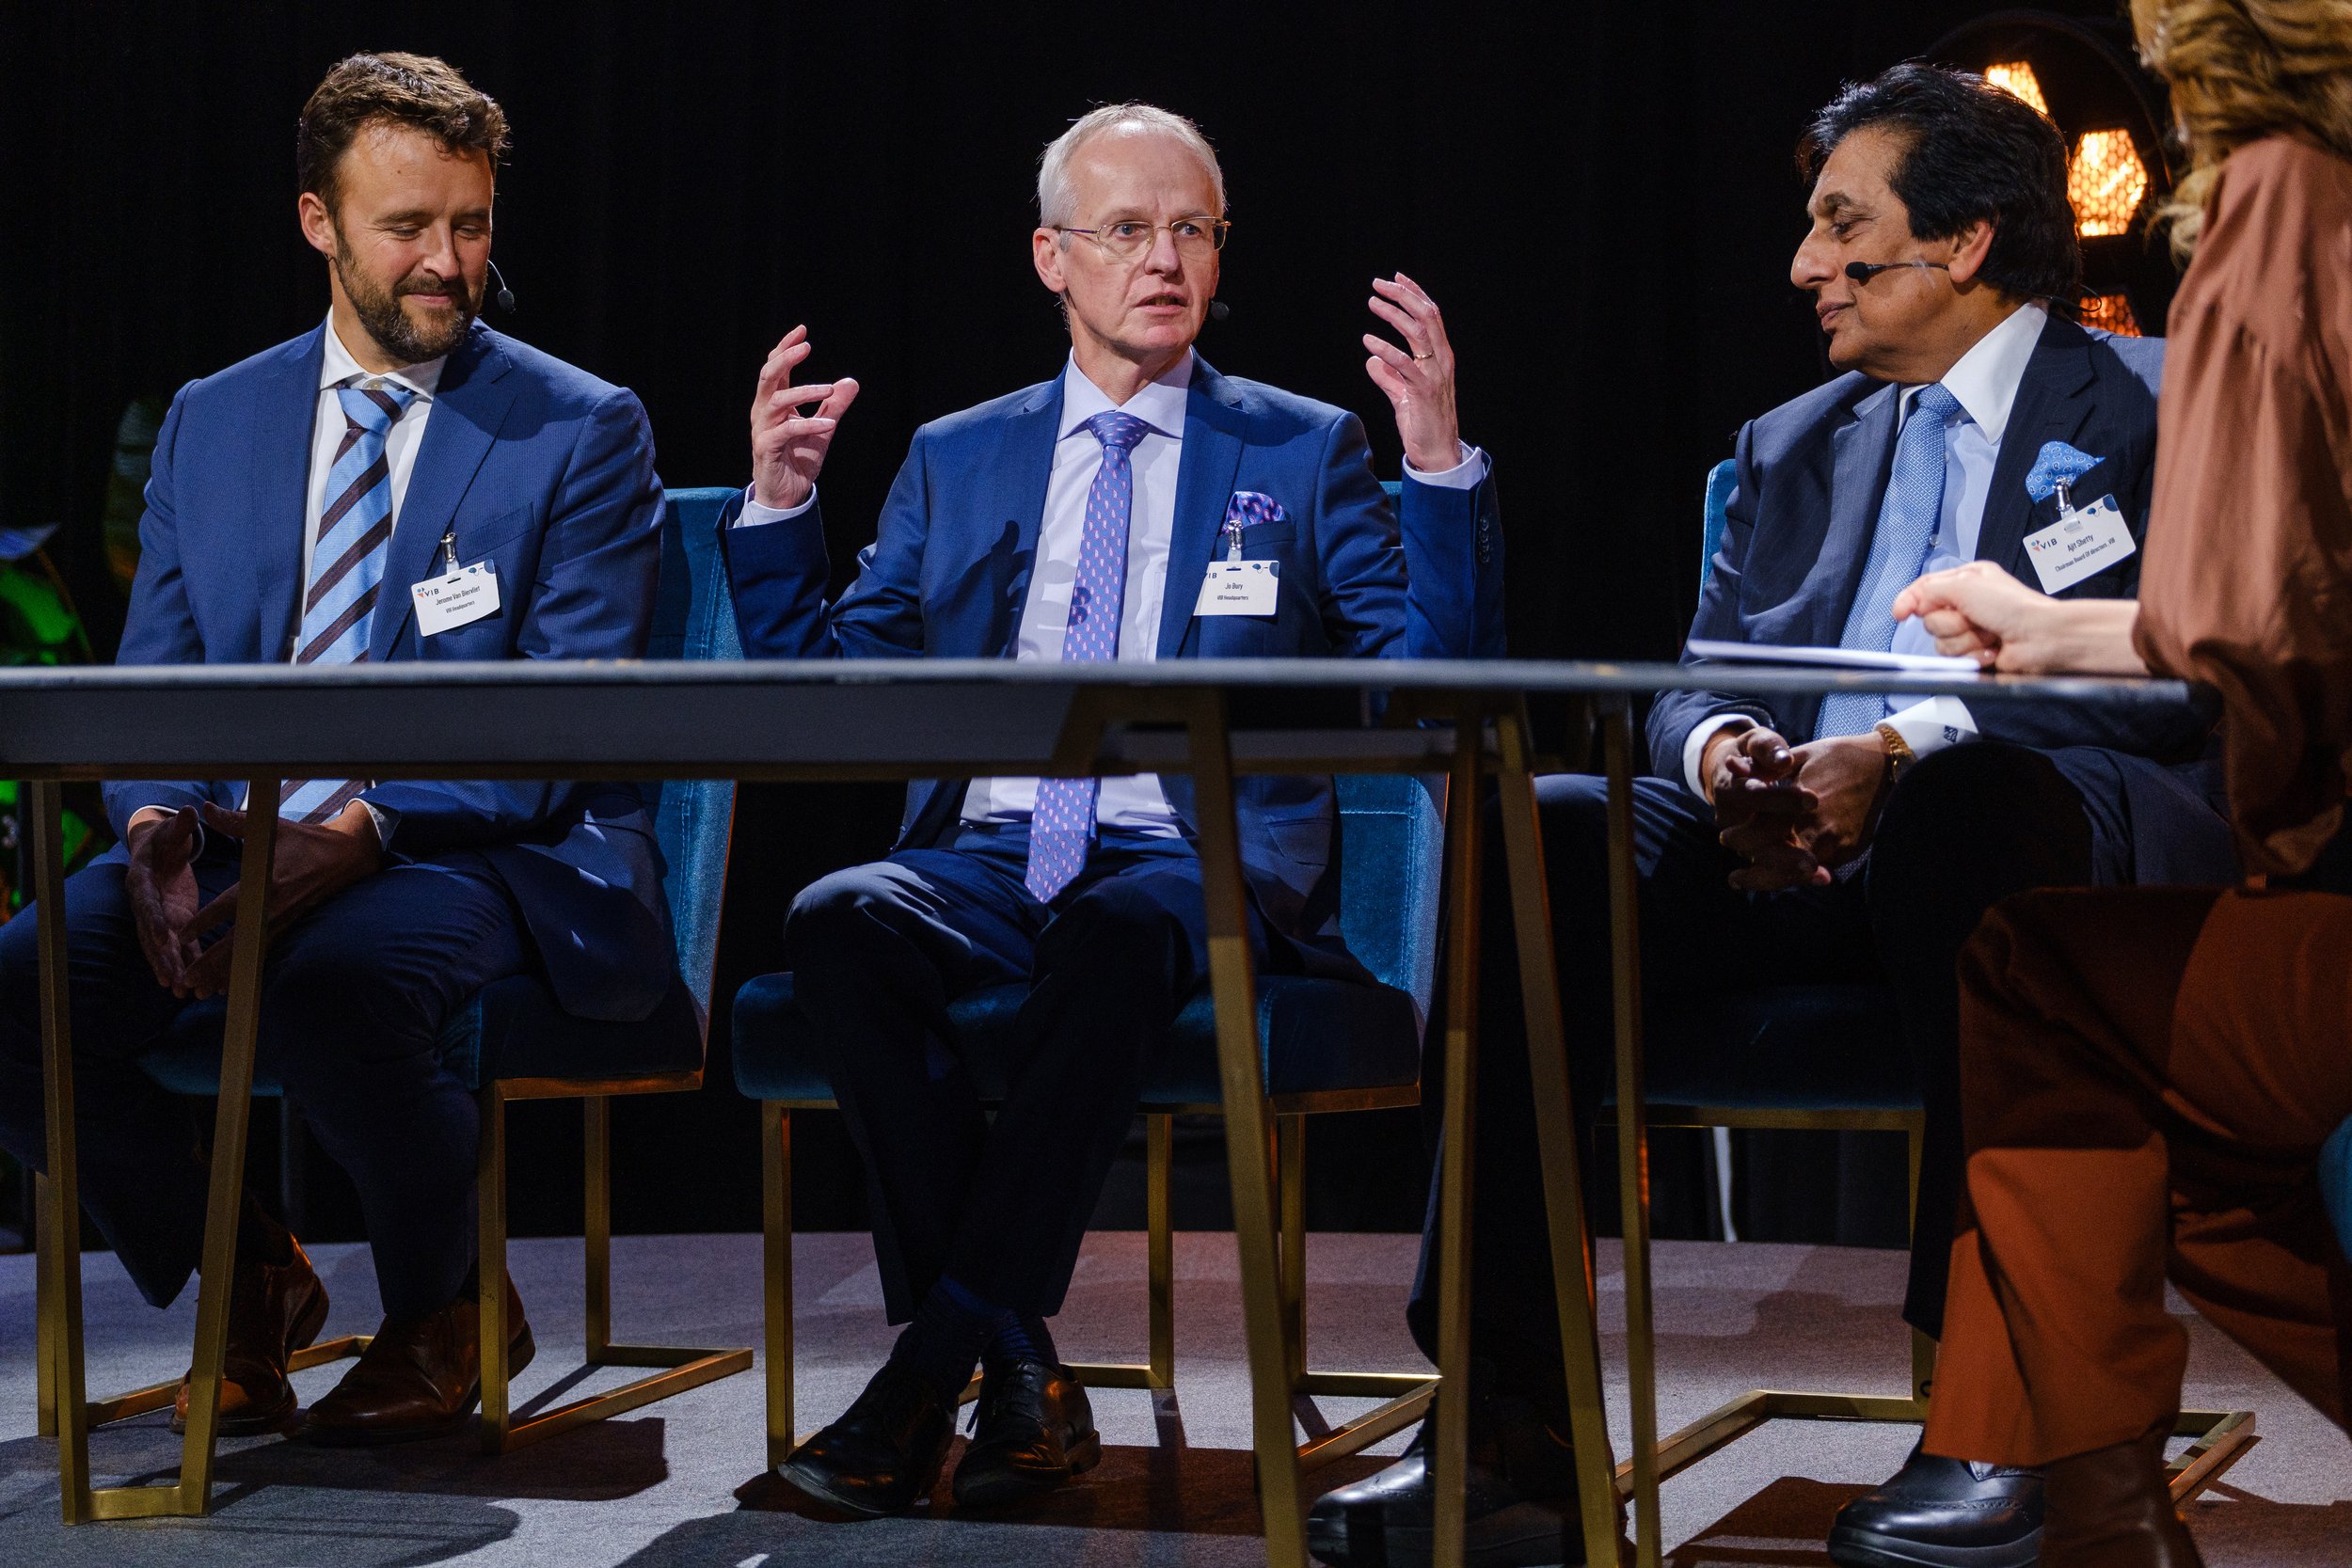 panel 25 Years of VIB event  - 13 October 2021.jpg